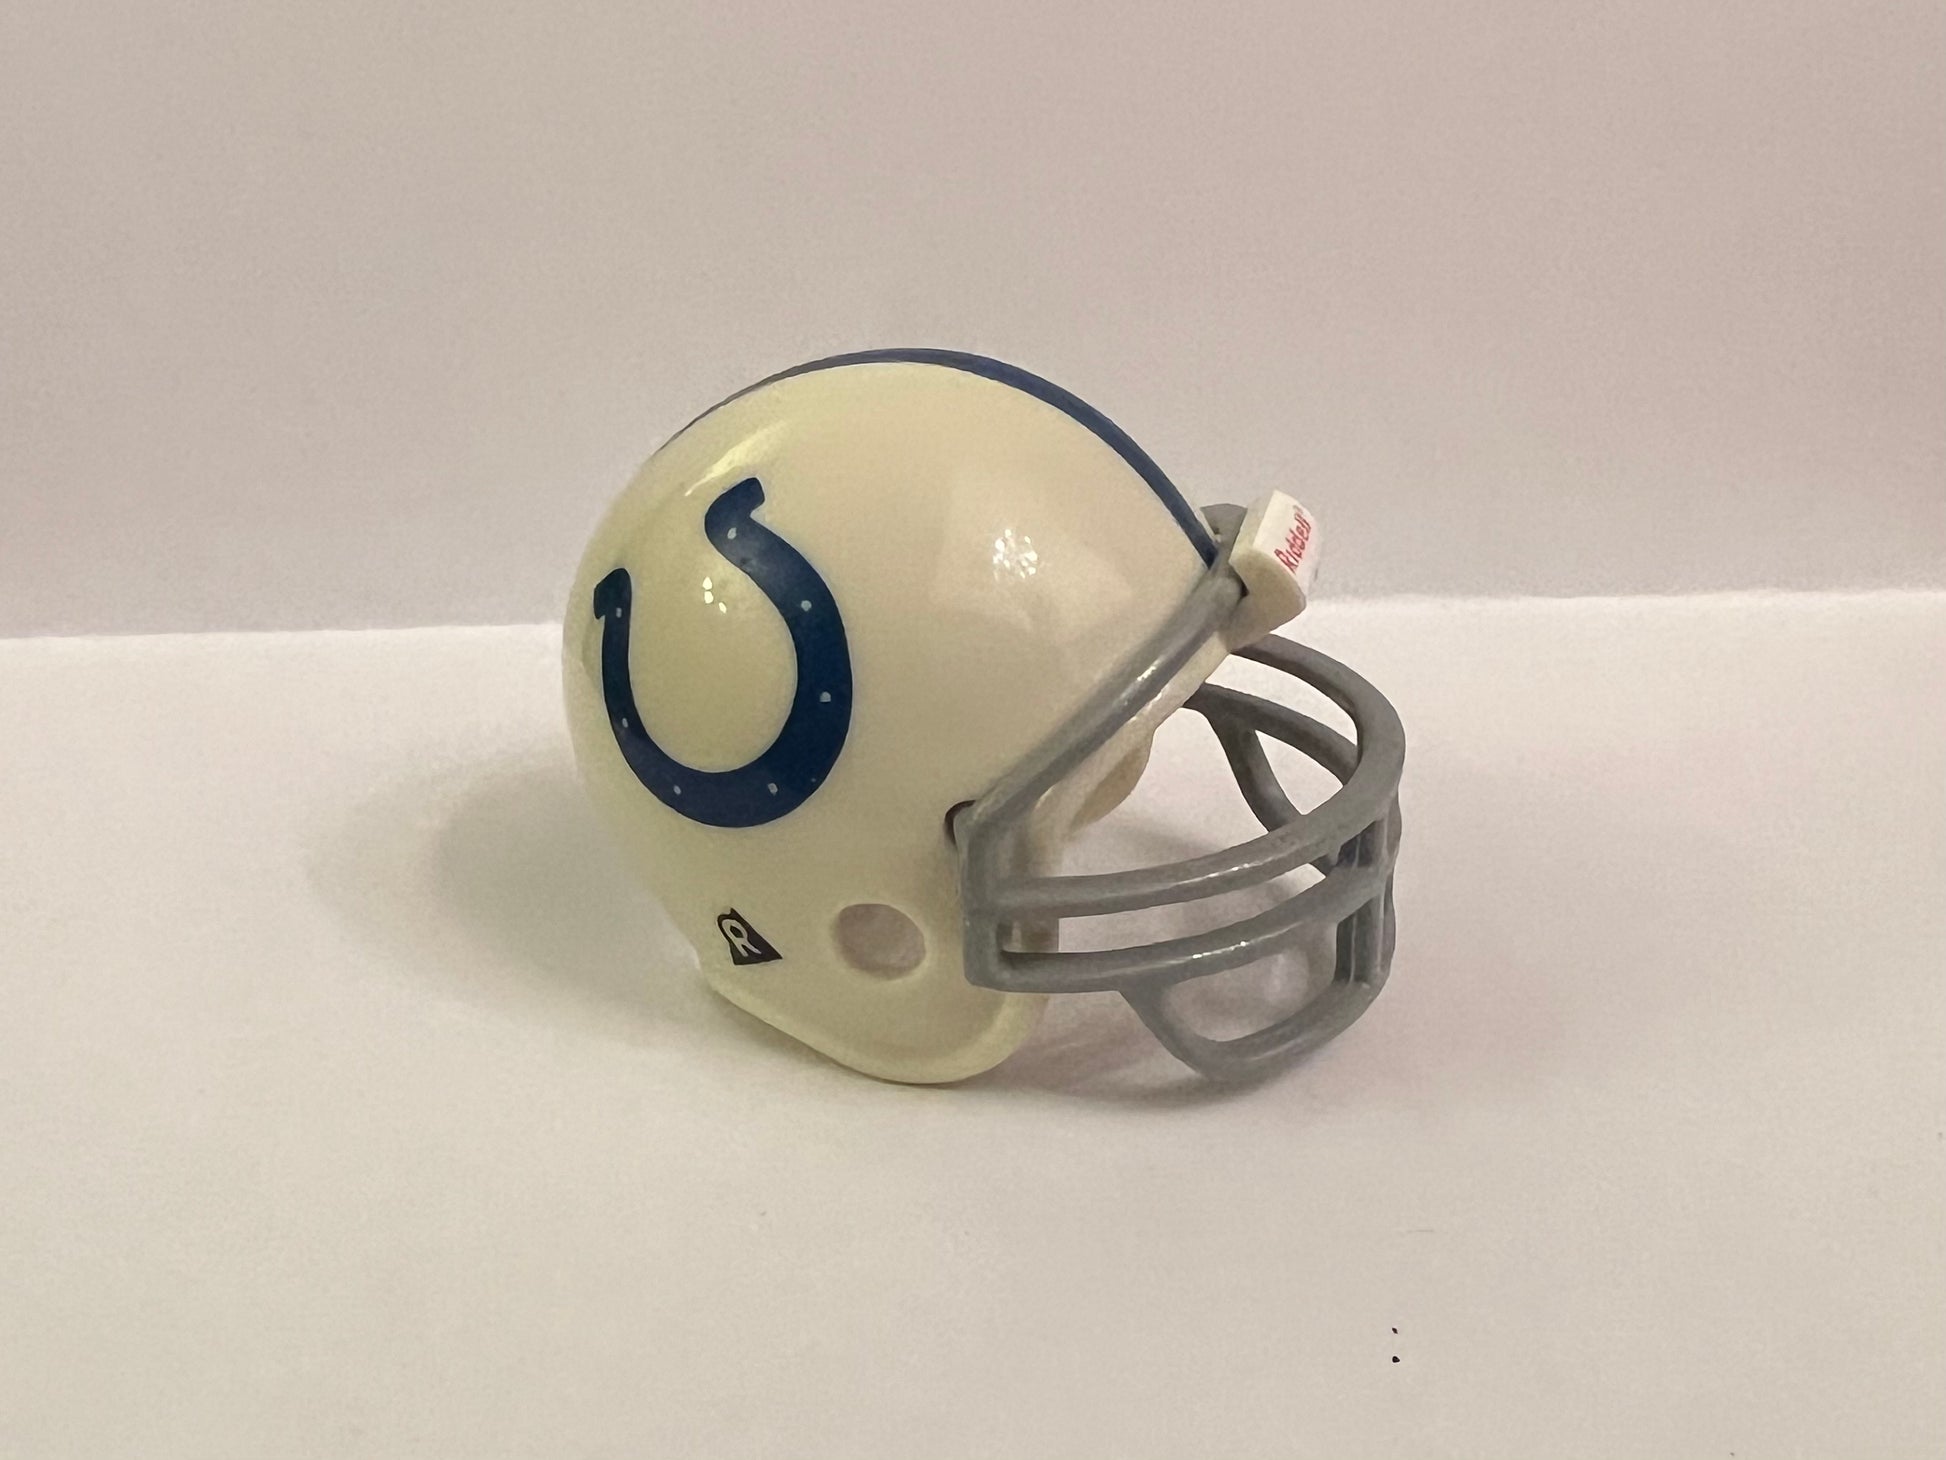 Baltimore Colts Riddell NFL Pocket Pro Helmet 1957-77 Throwback  (White helmet with Grey Mask) from series II (2)  WESTBROOKSPORTSCARDS   